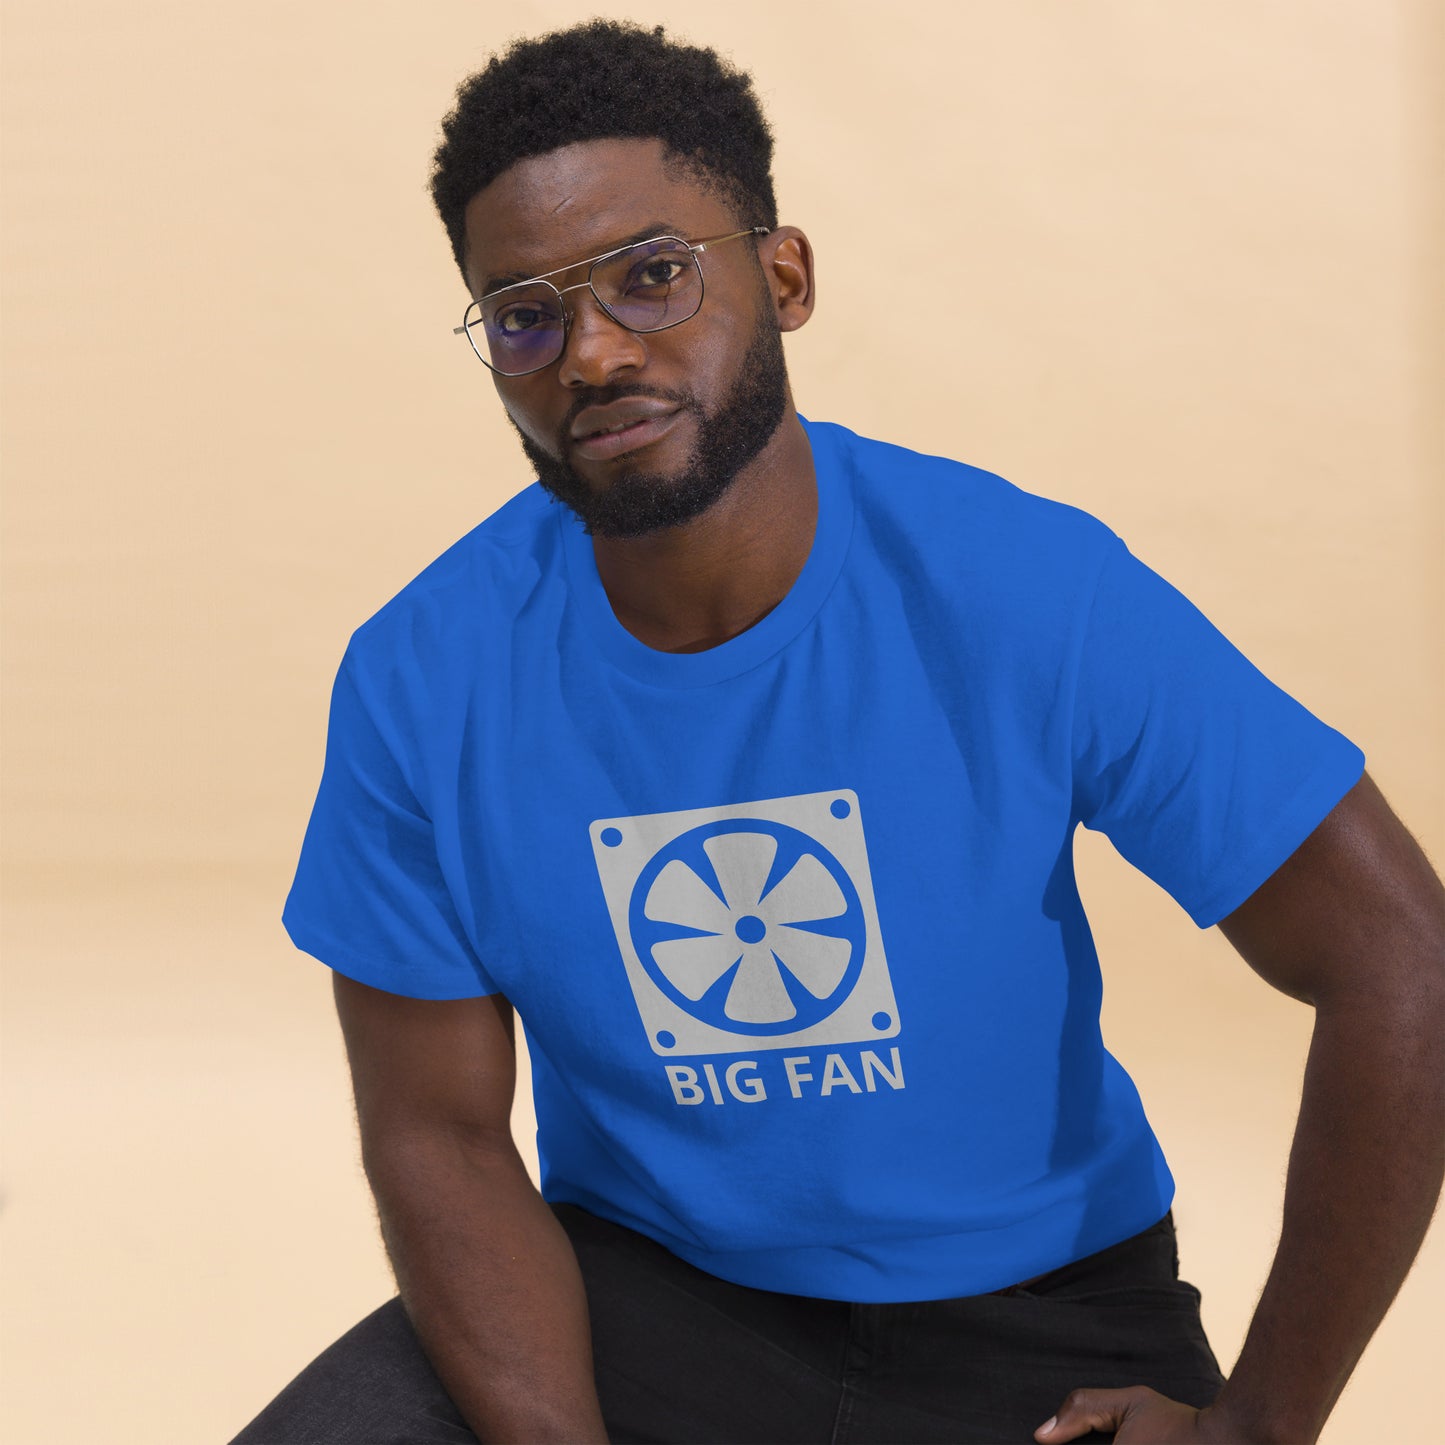 Man with royal blue t-shirt with image of a big computer fan and the text "BIG FAN"